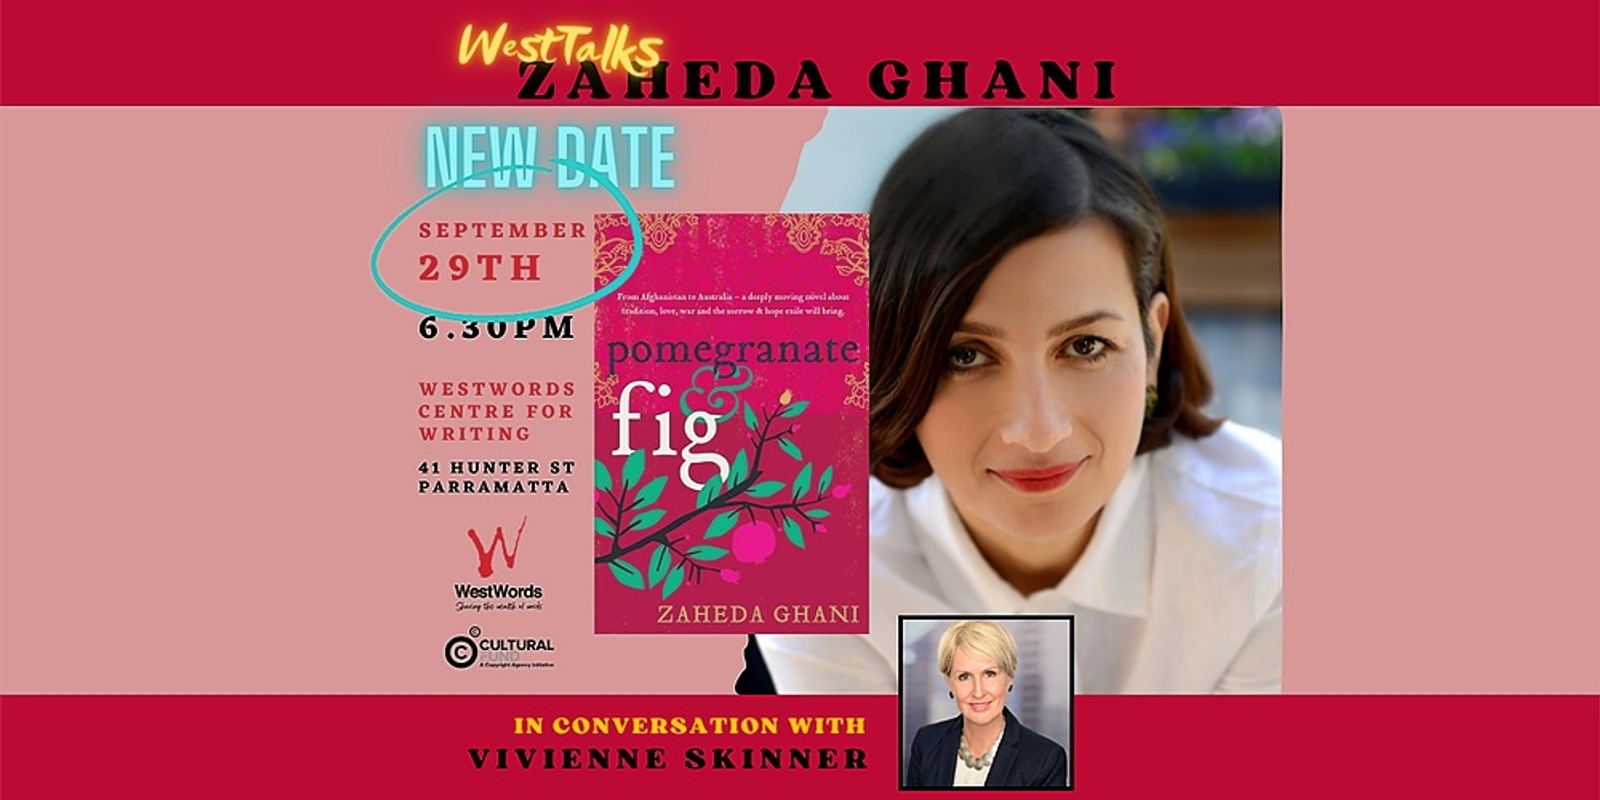 Banner image for WestTalks: In Conversation with Zaheda Ghani